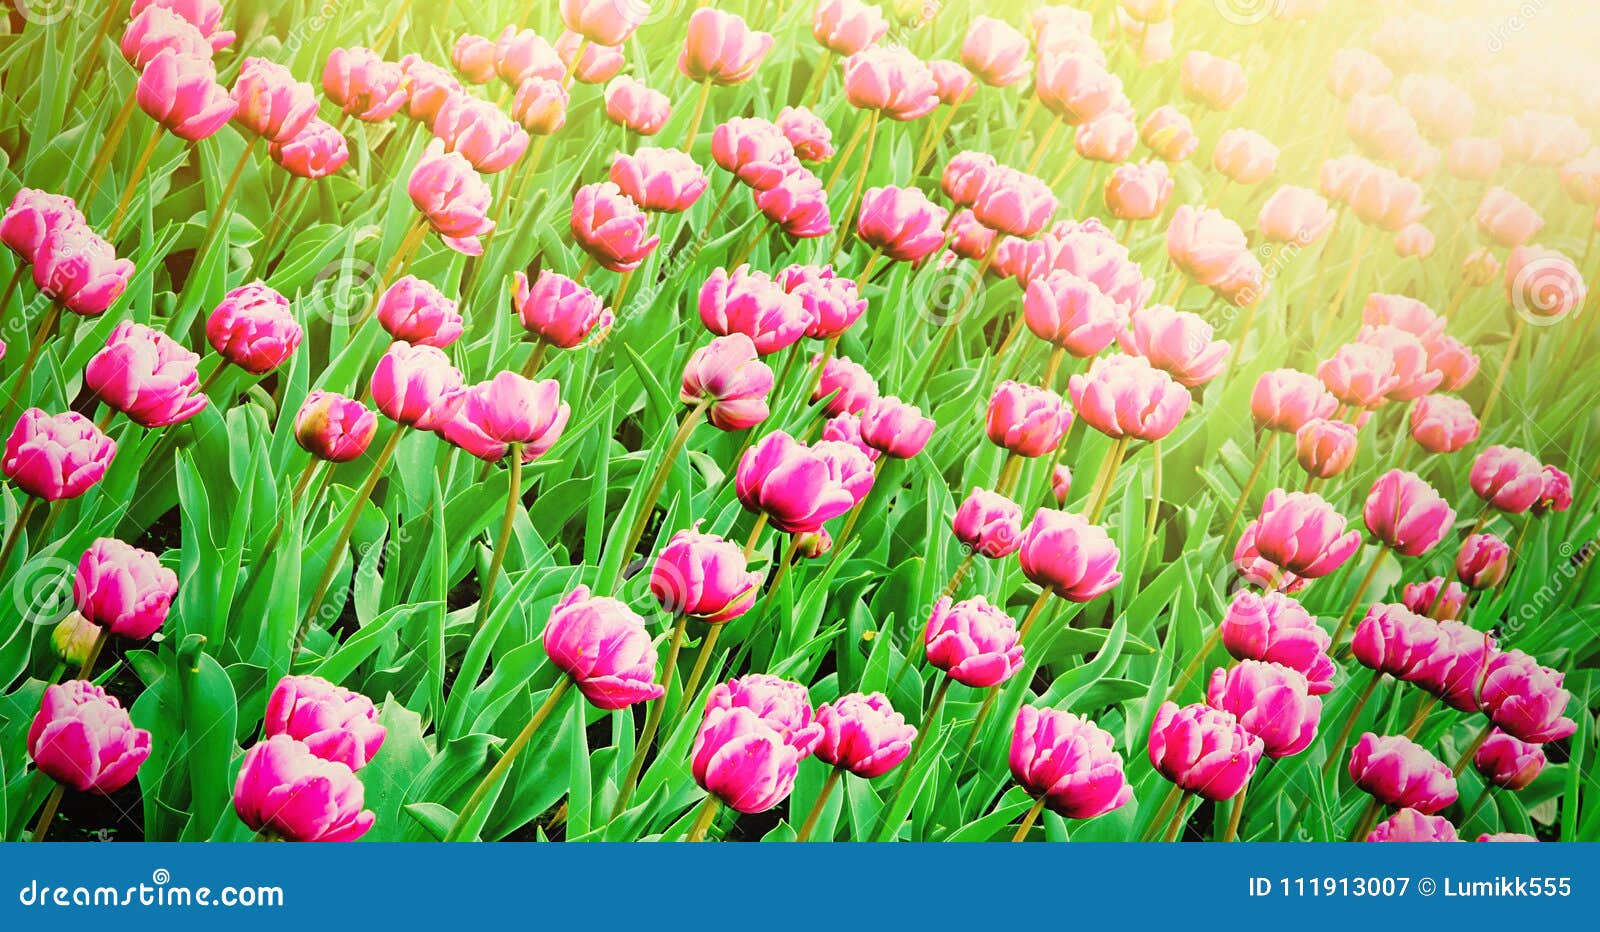 Spring Nature Wallpaper of Pink Tulips Flowers Stock Image - Image of  panoramic, flower: 111913007